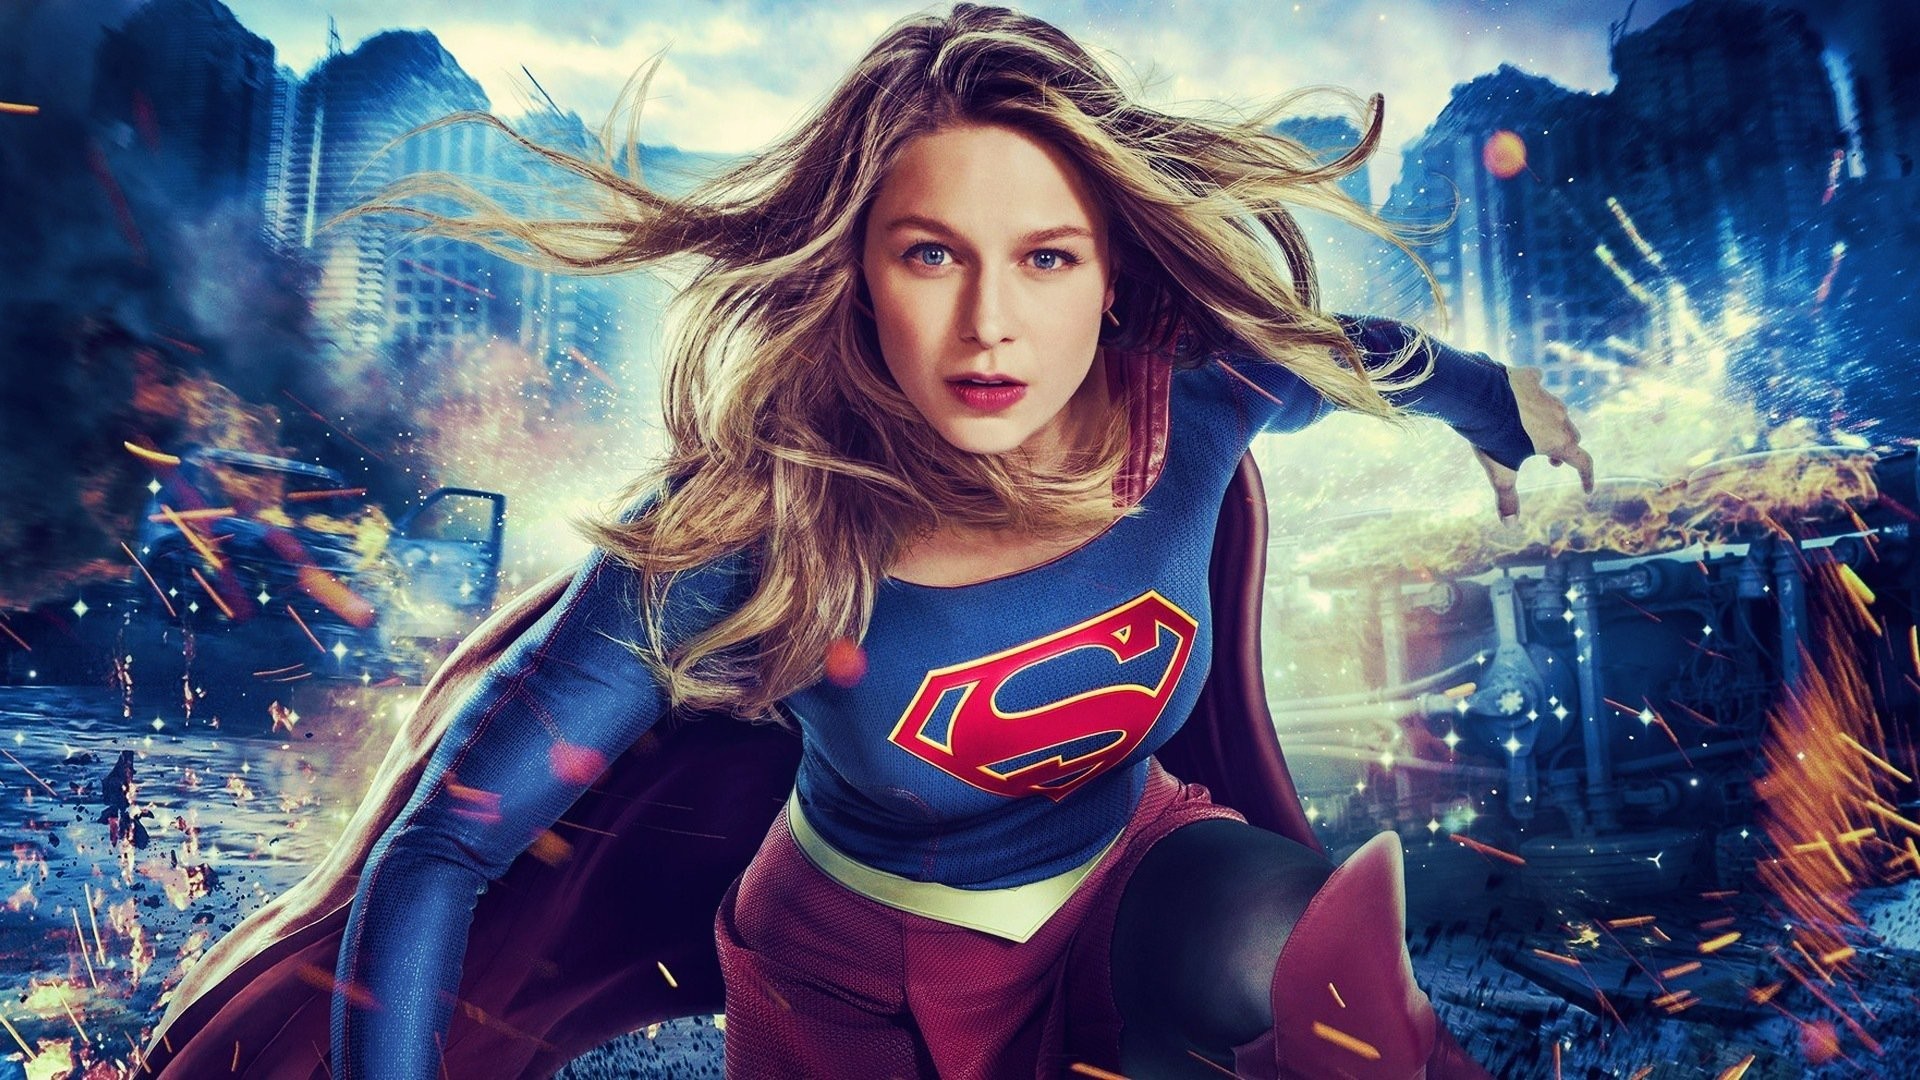 Supergirl Desktop Wallpaper with high-resolution 1920x1080 pixel. You can use this wallpaper for your Windows and Mac OS computers as well as your Android and iPhone smartphones